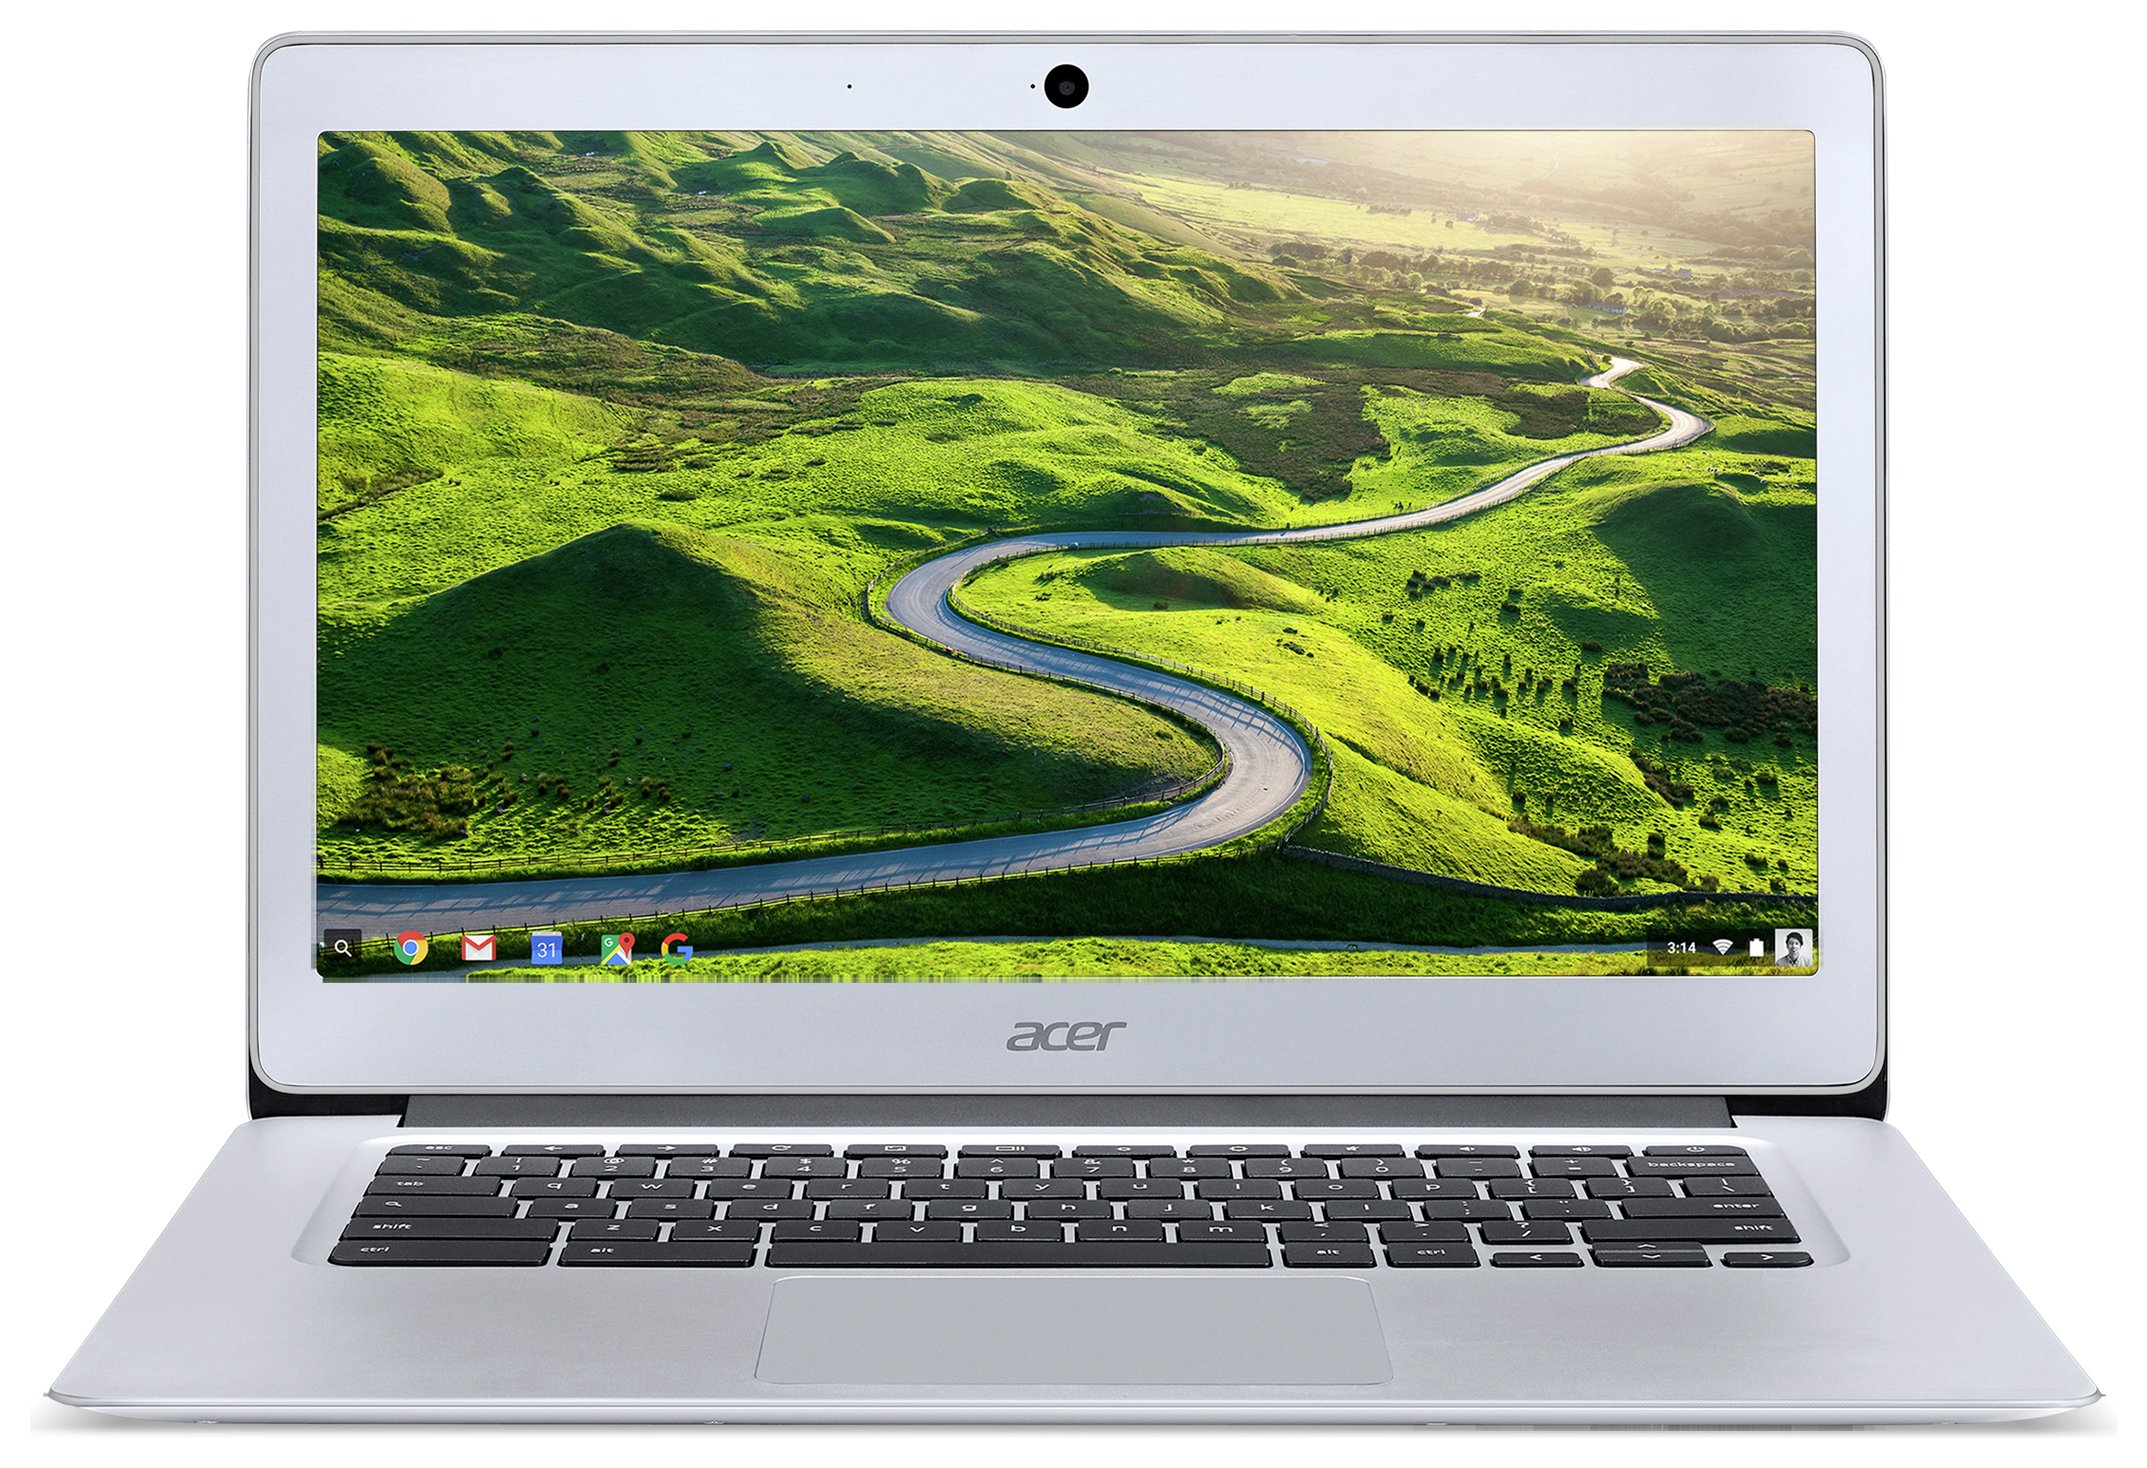 Acer Chromebook 14 Inch Celeron 2GB 16GB Laptop. Review